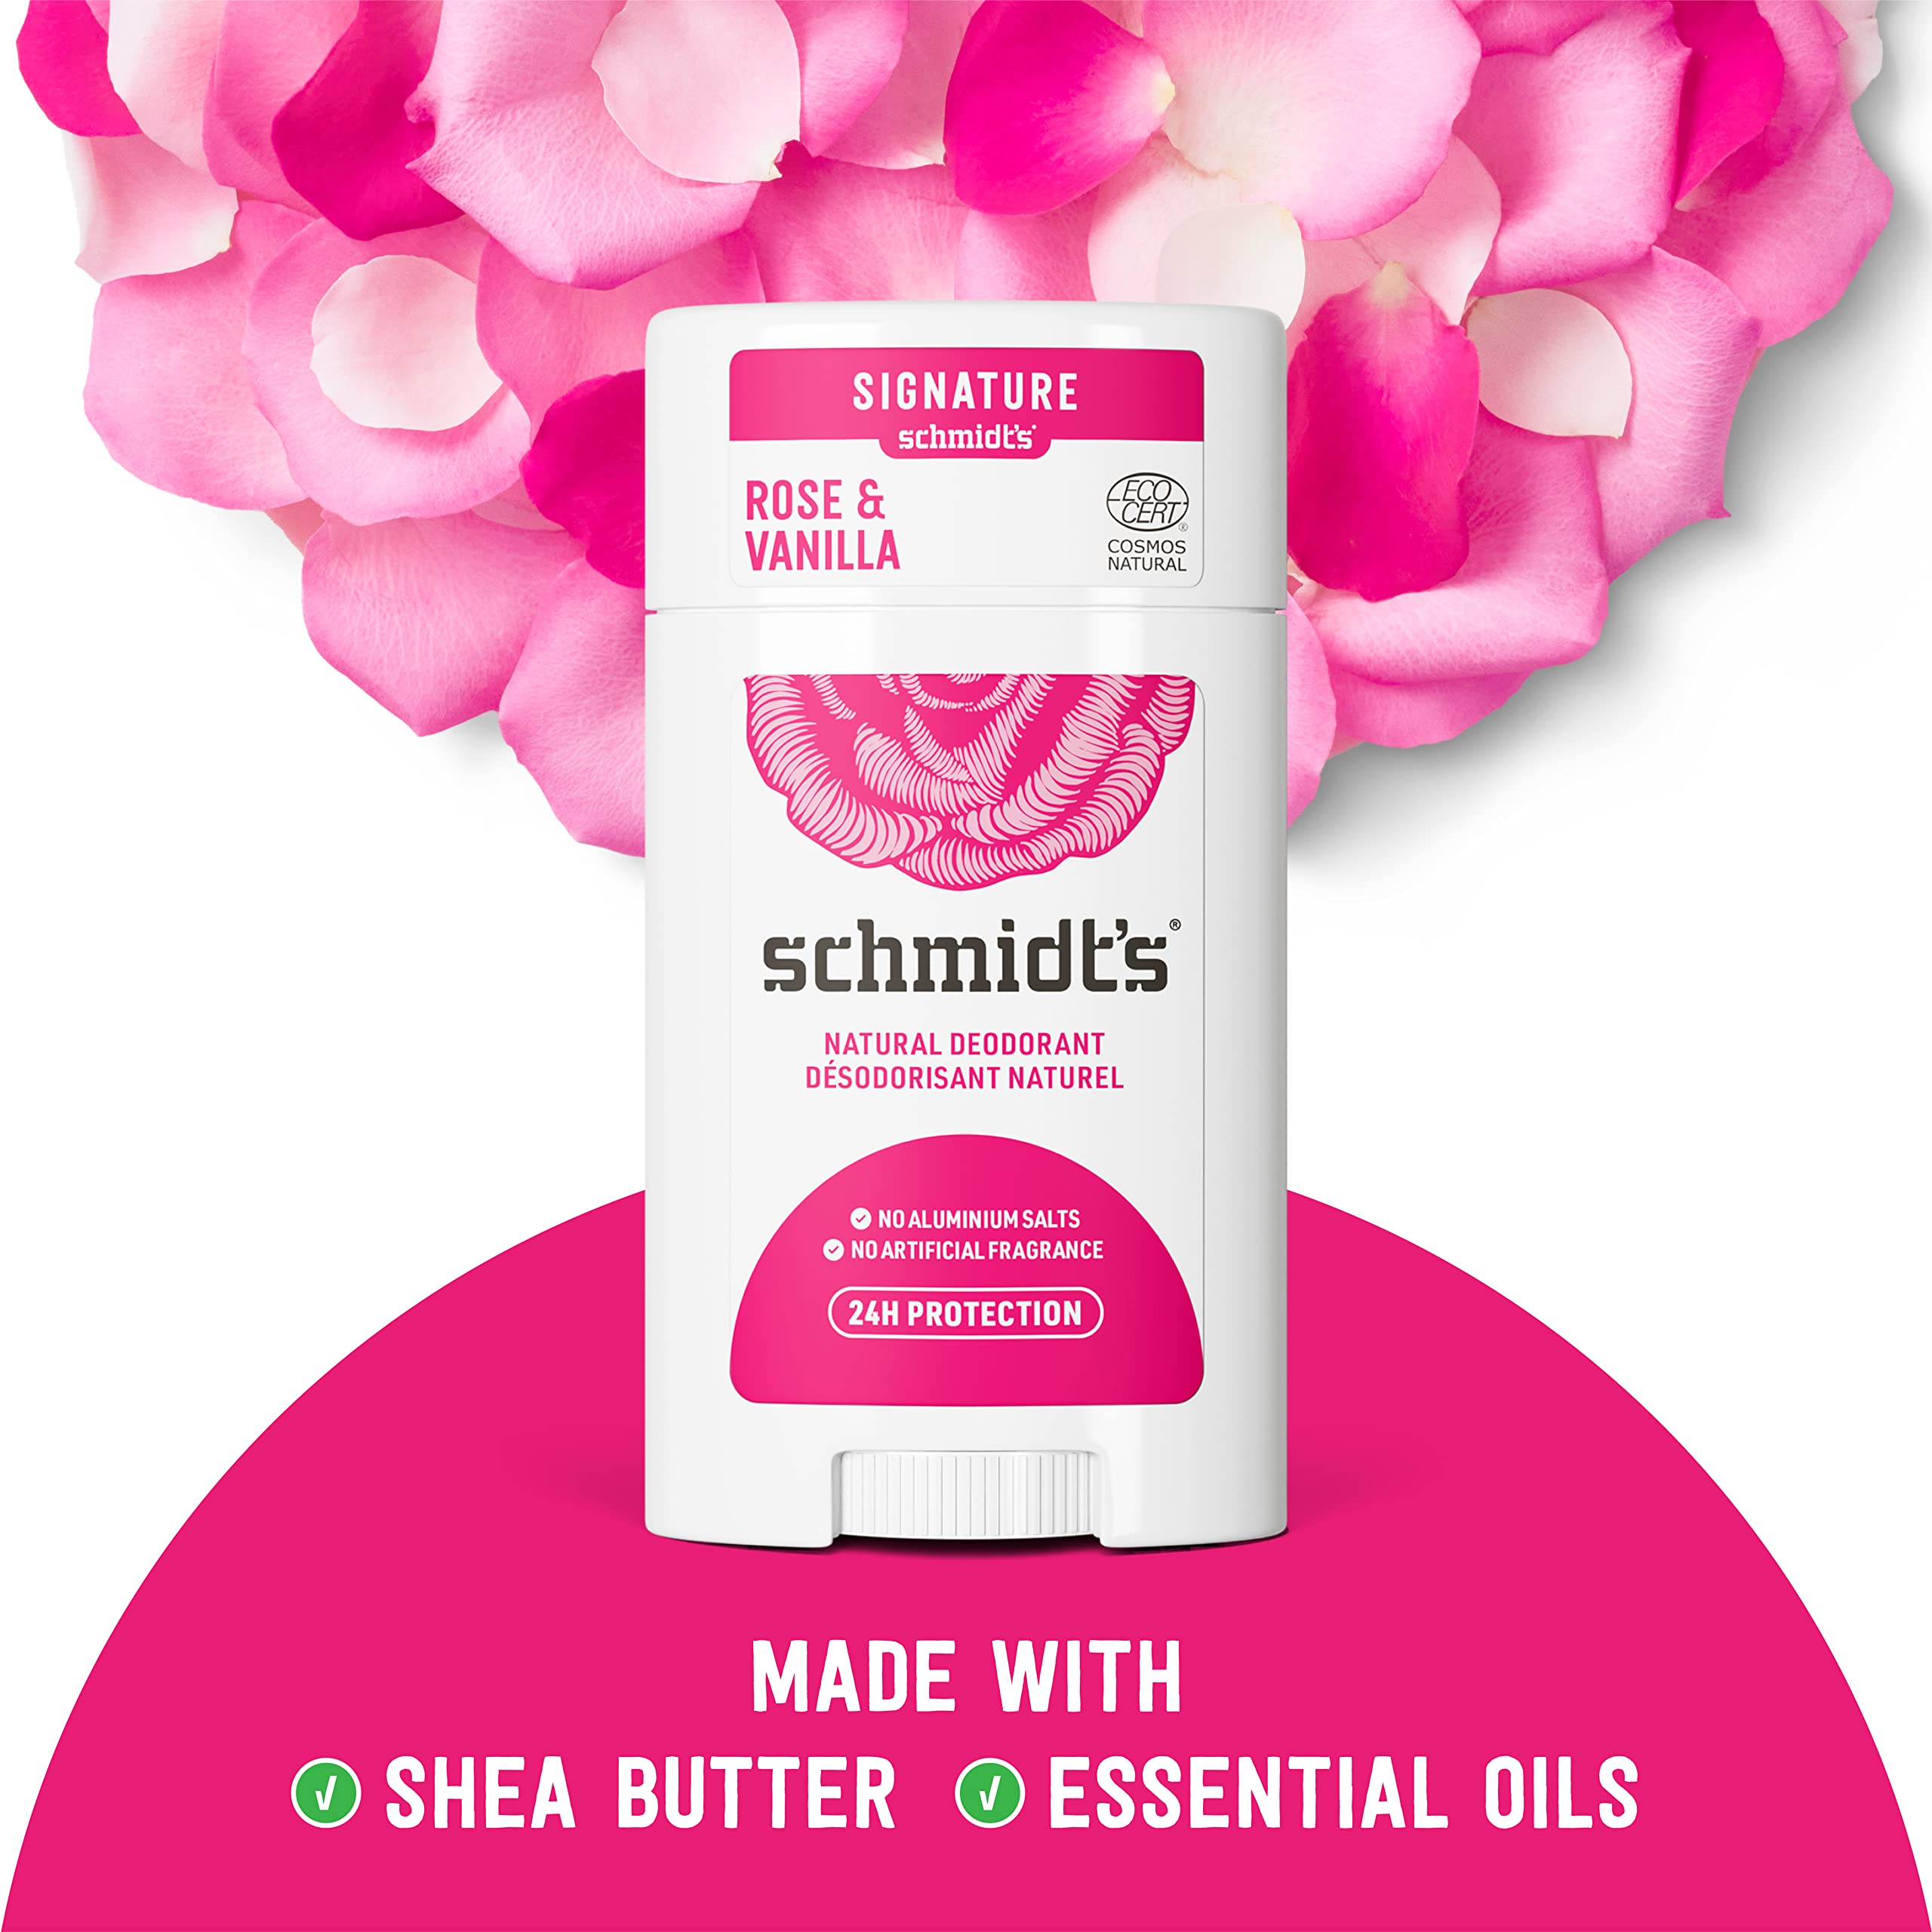 Schmidt's Aluminum Free Natural Deodorant for Women and Men, Rose & Vanilla with 24 Hour Odor Protection, Certified Natural, Vegan, Cruelty Free 3.25 oz